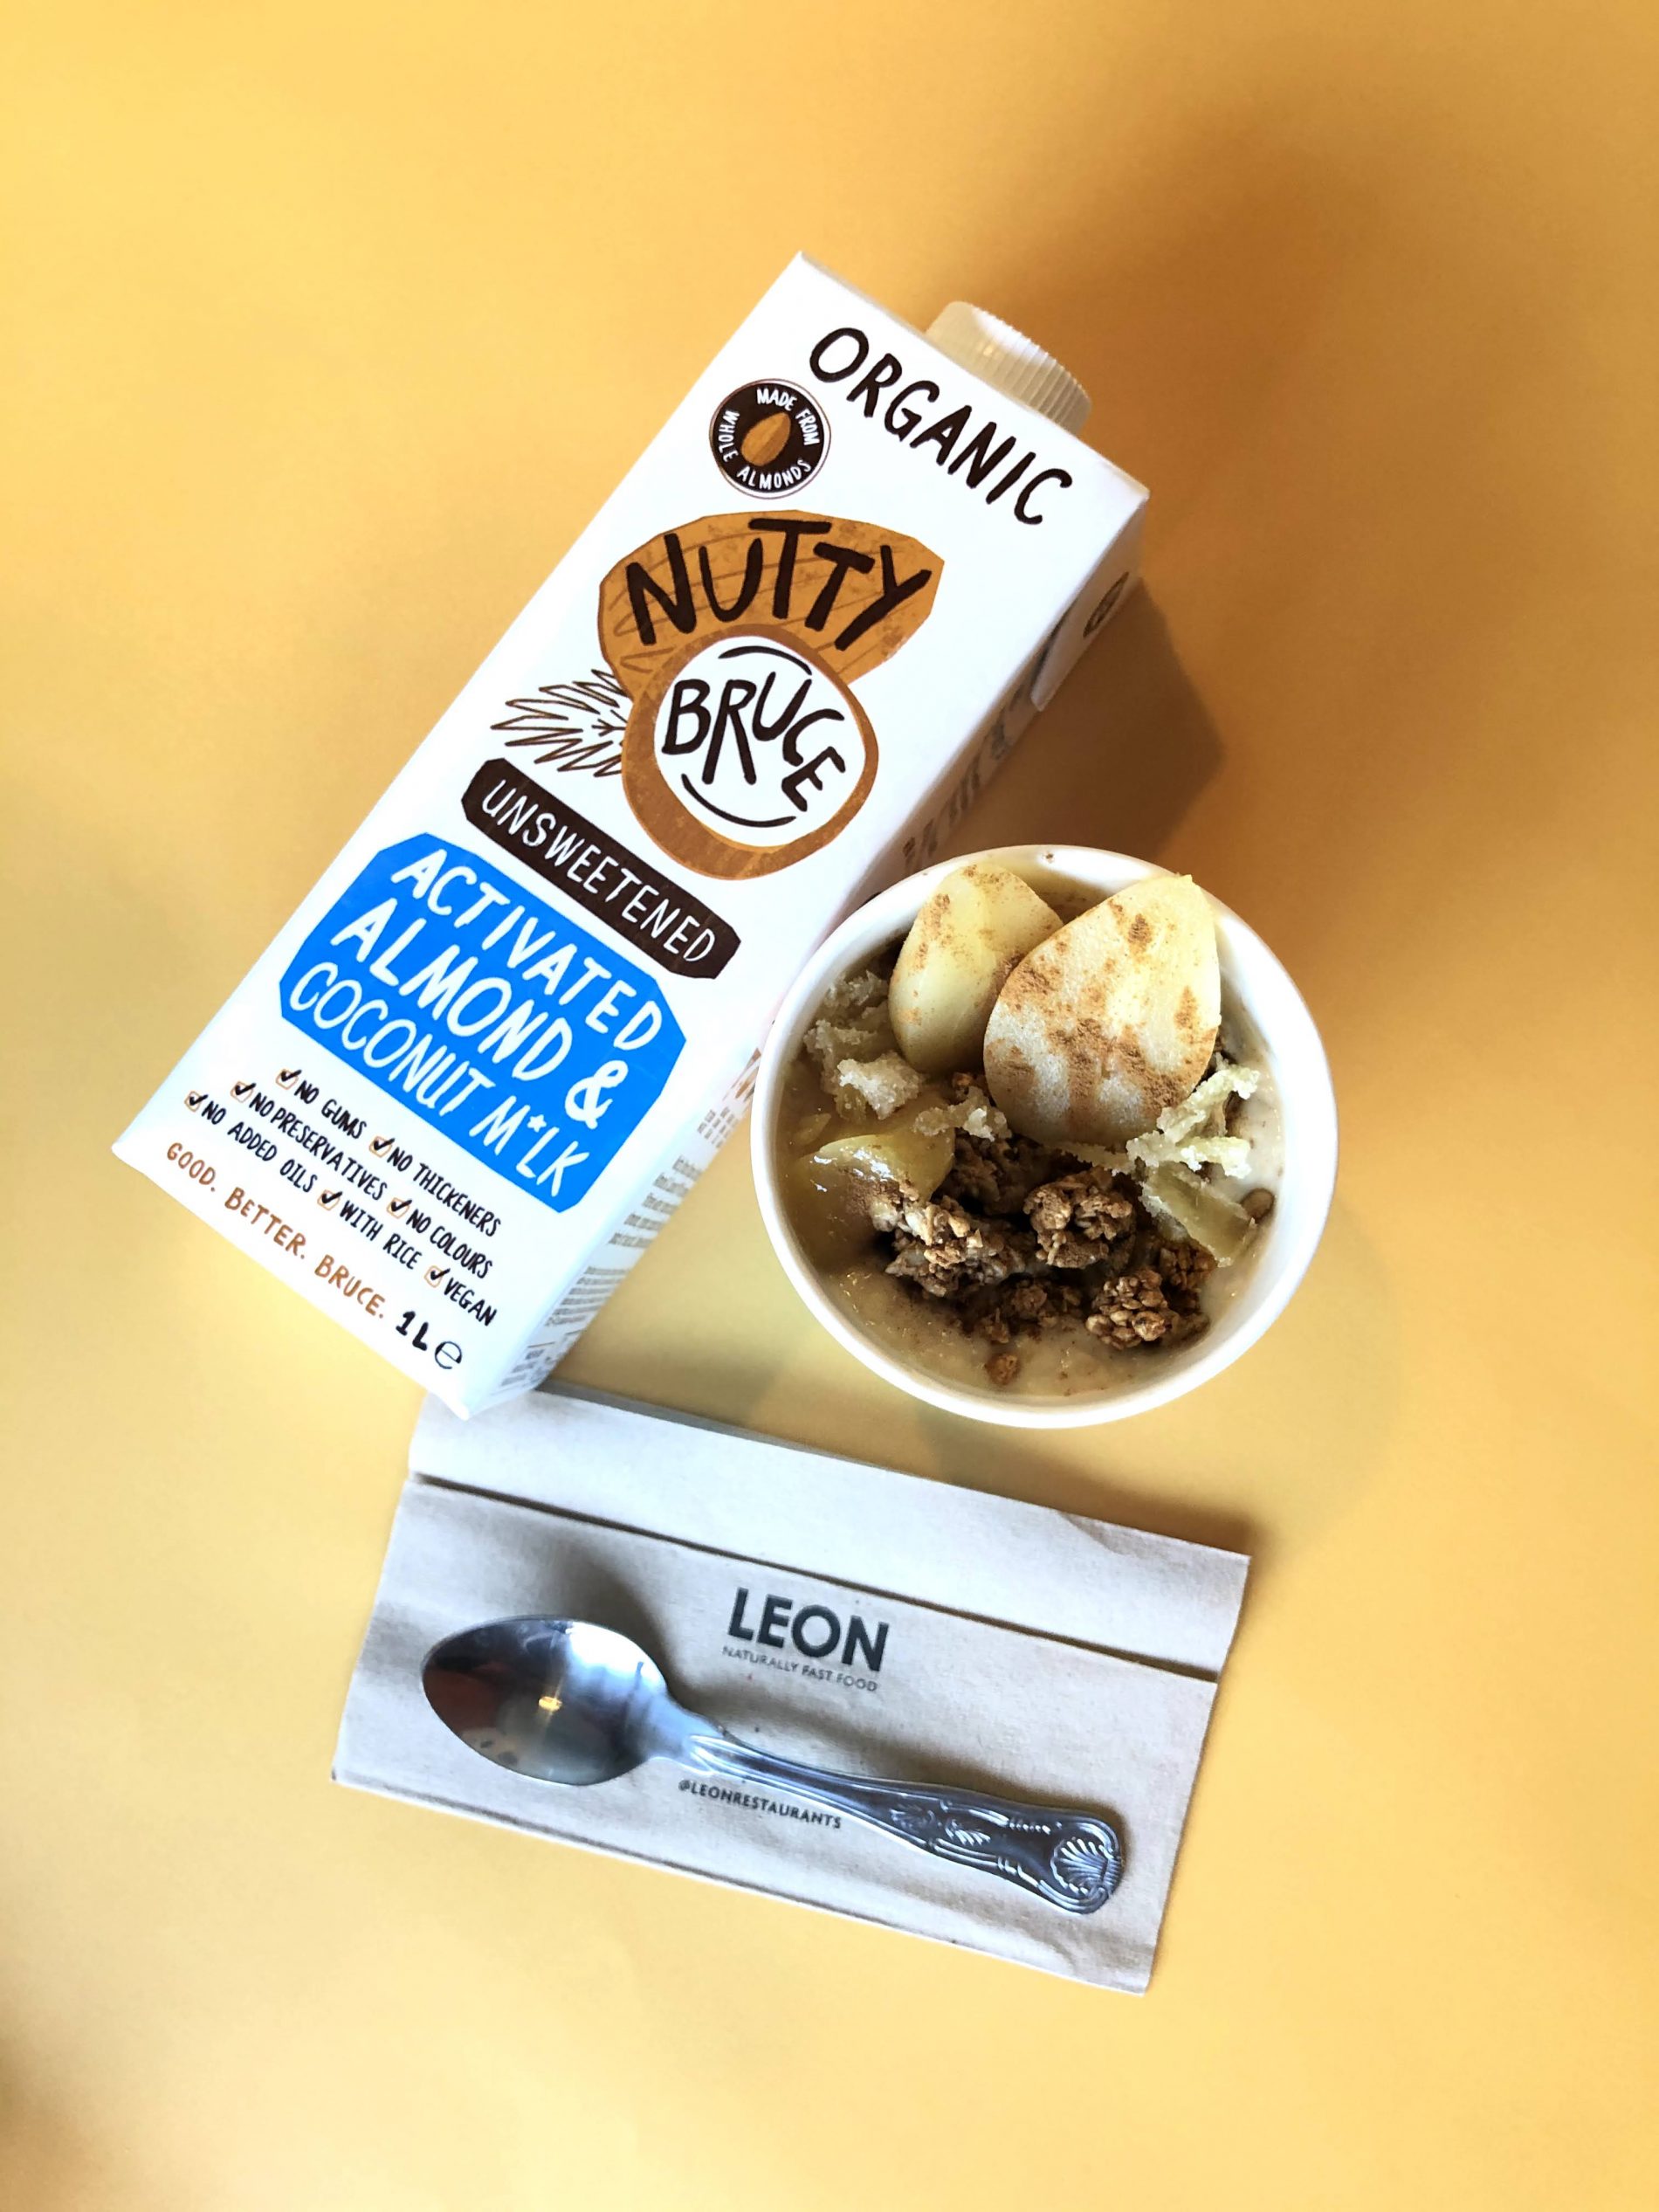 Nutty Bruce and LEON Launch First Porridge with Activated Almond M*lk on the High Street